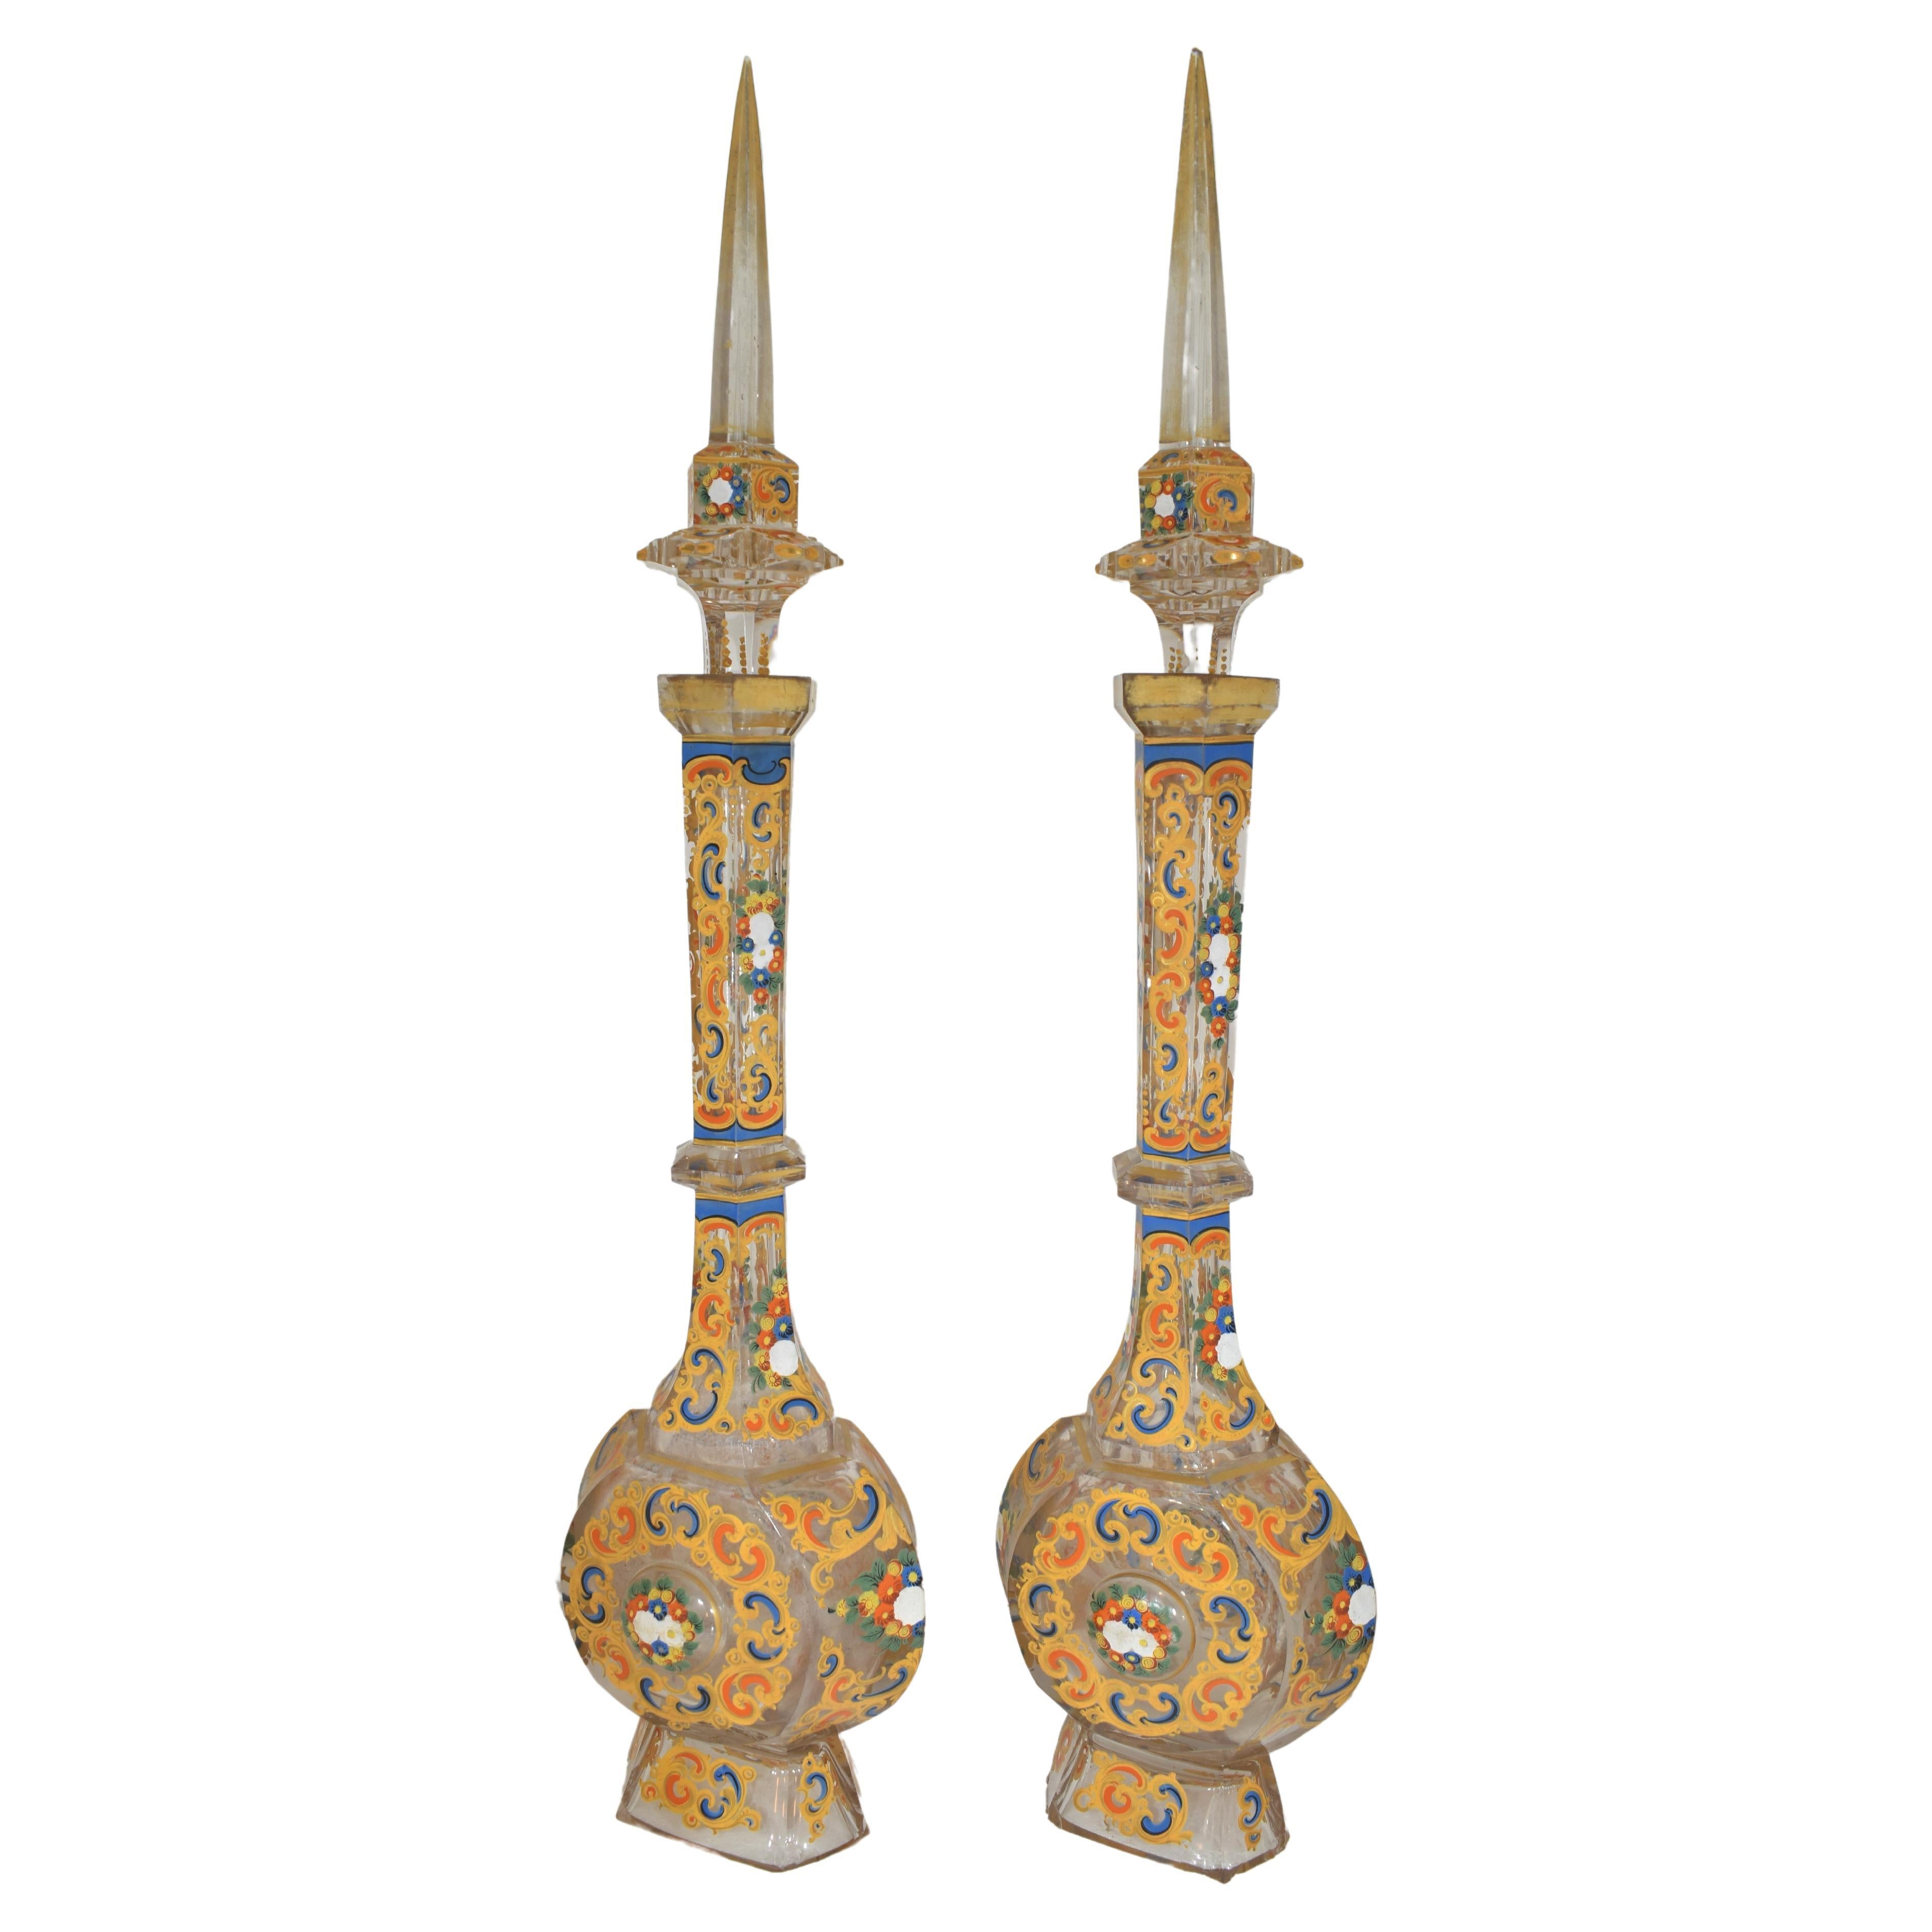 Enameled Pair of Enamelled Cut-Glass Decanters, Bohemian for Ottoman Market 19th Century For Sale